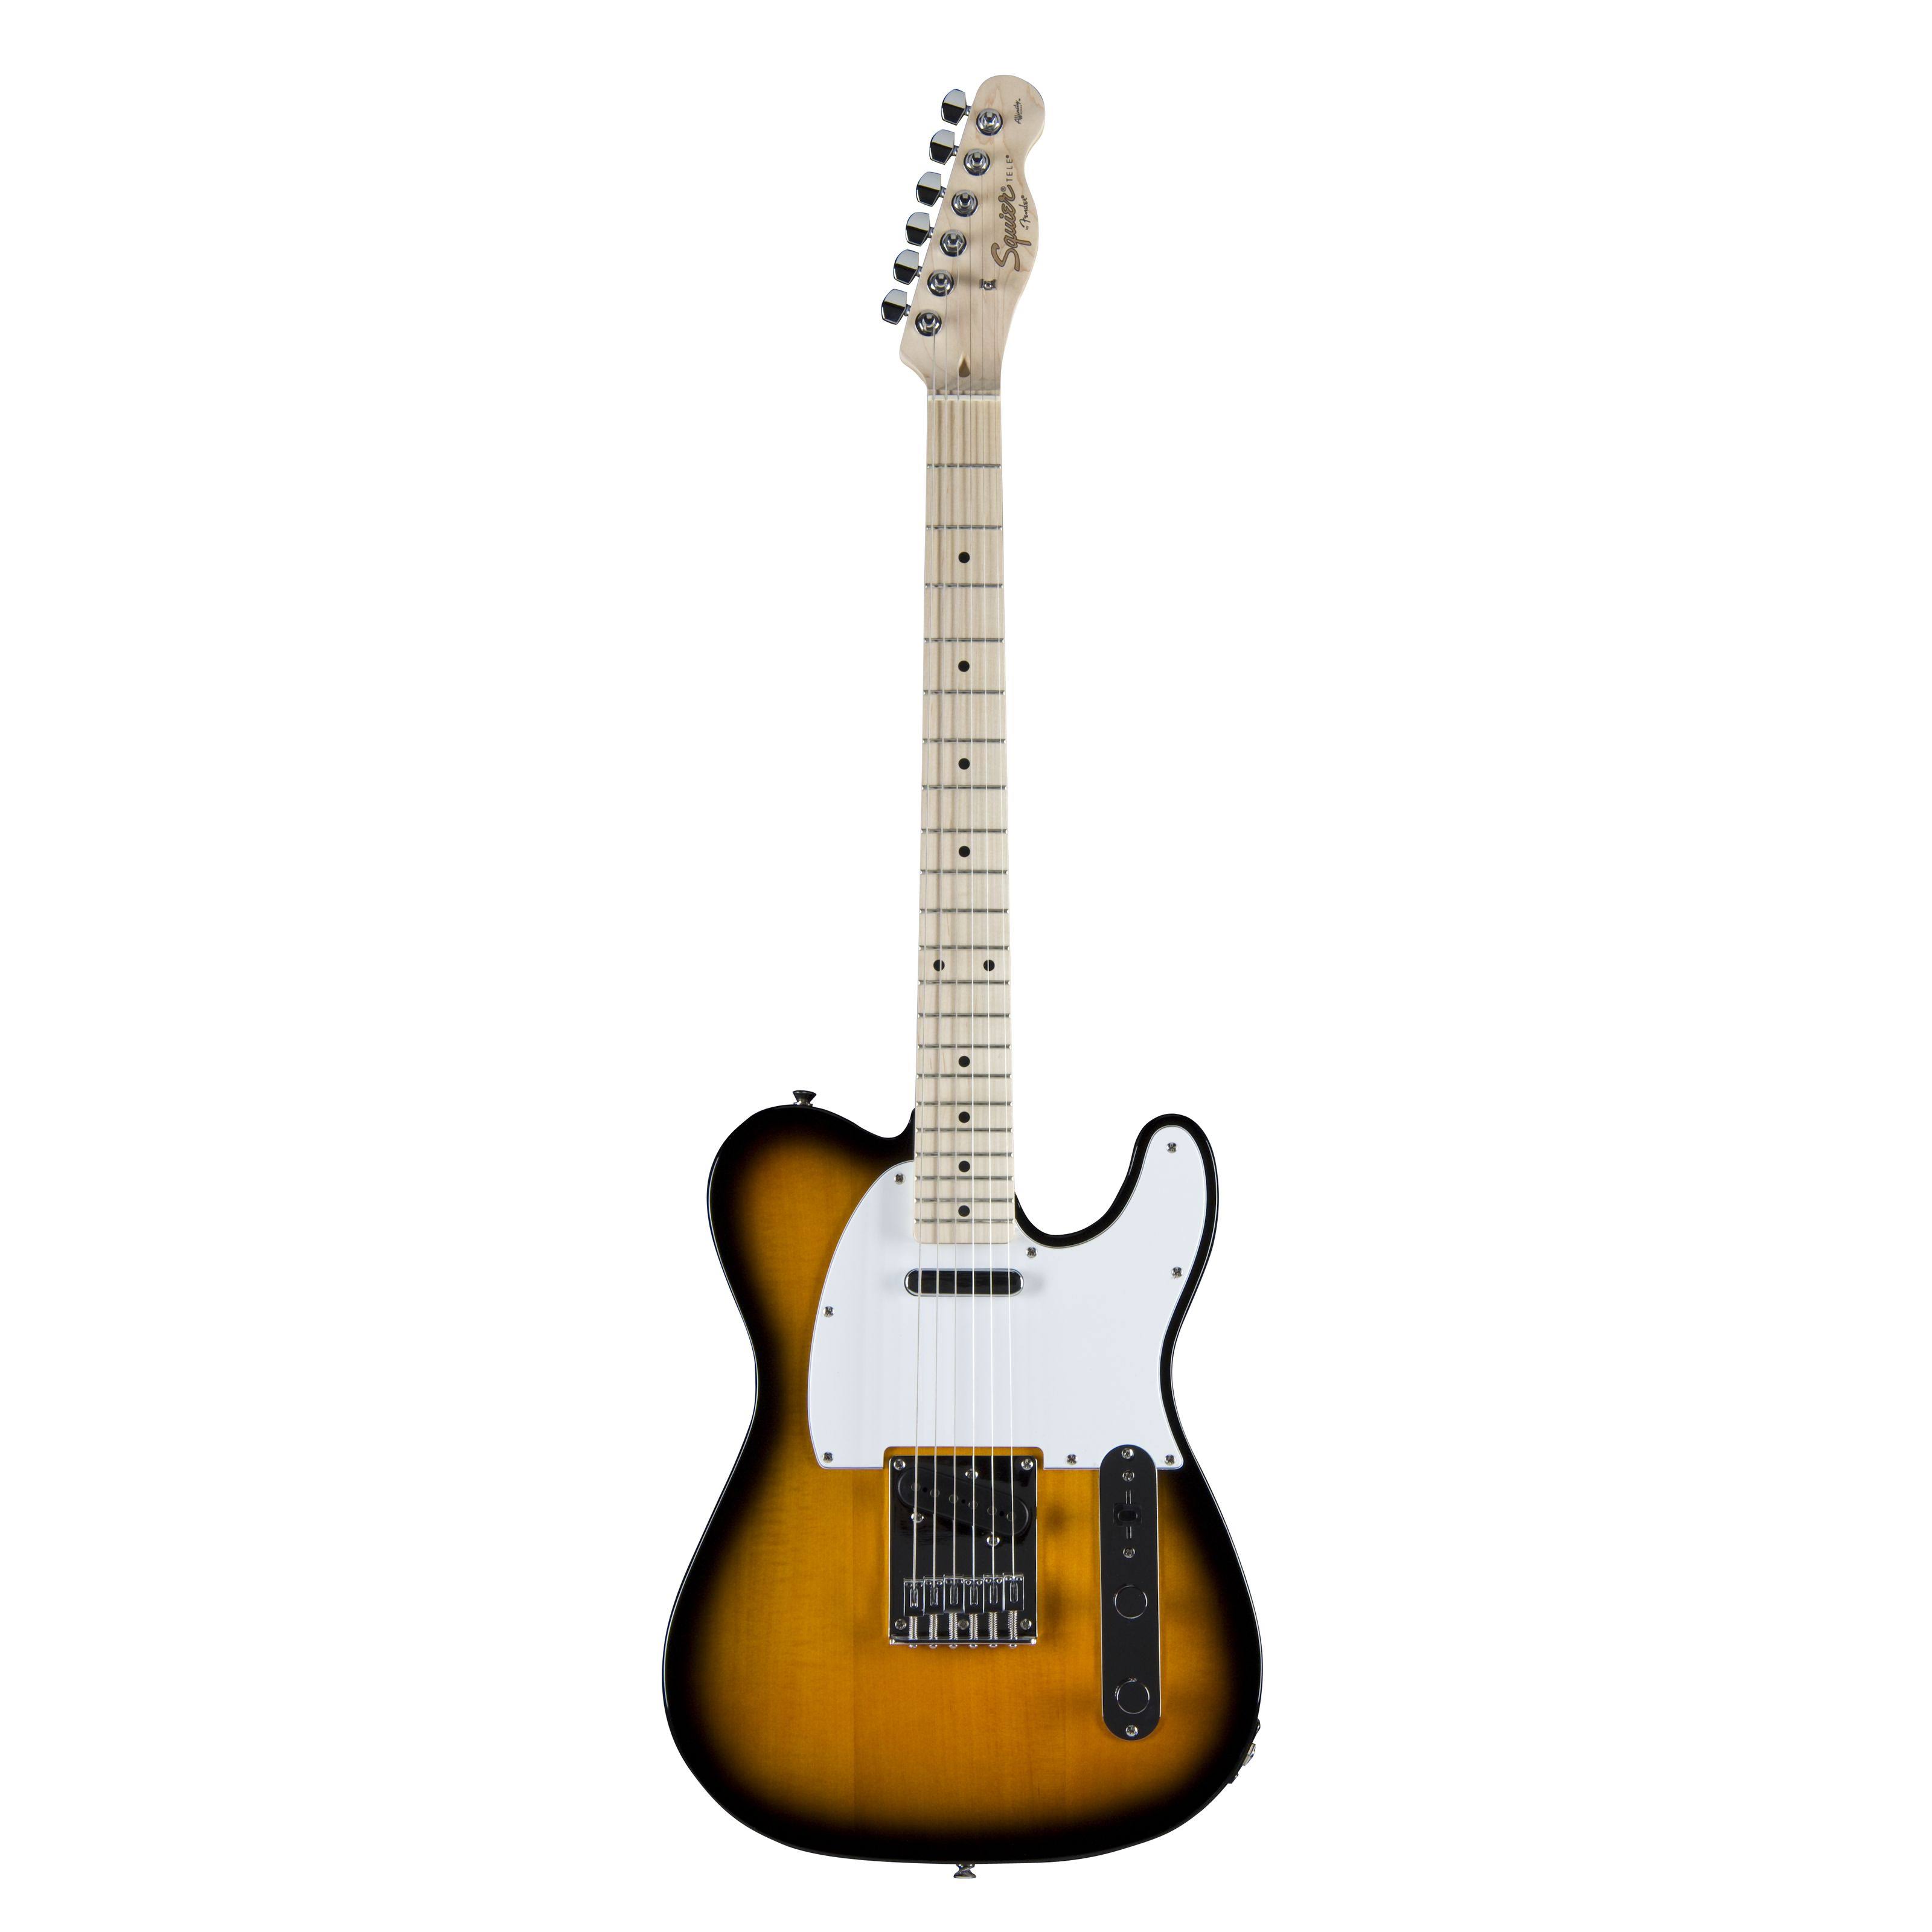 Fender Squier Affinity Telecaster Electric Guitar - Maple Fingerboard